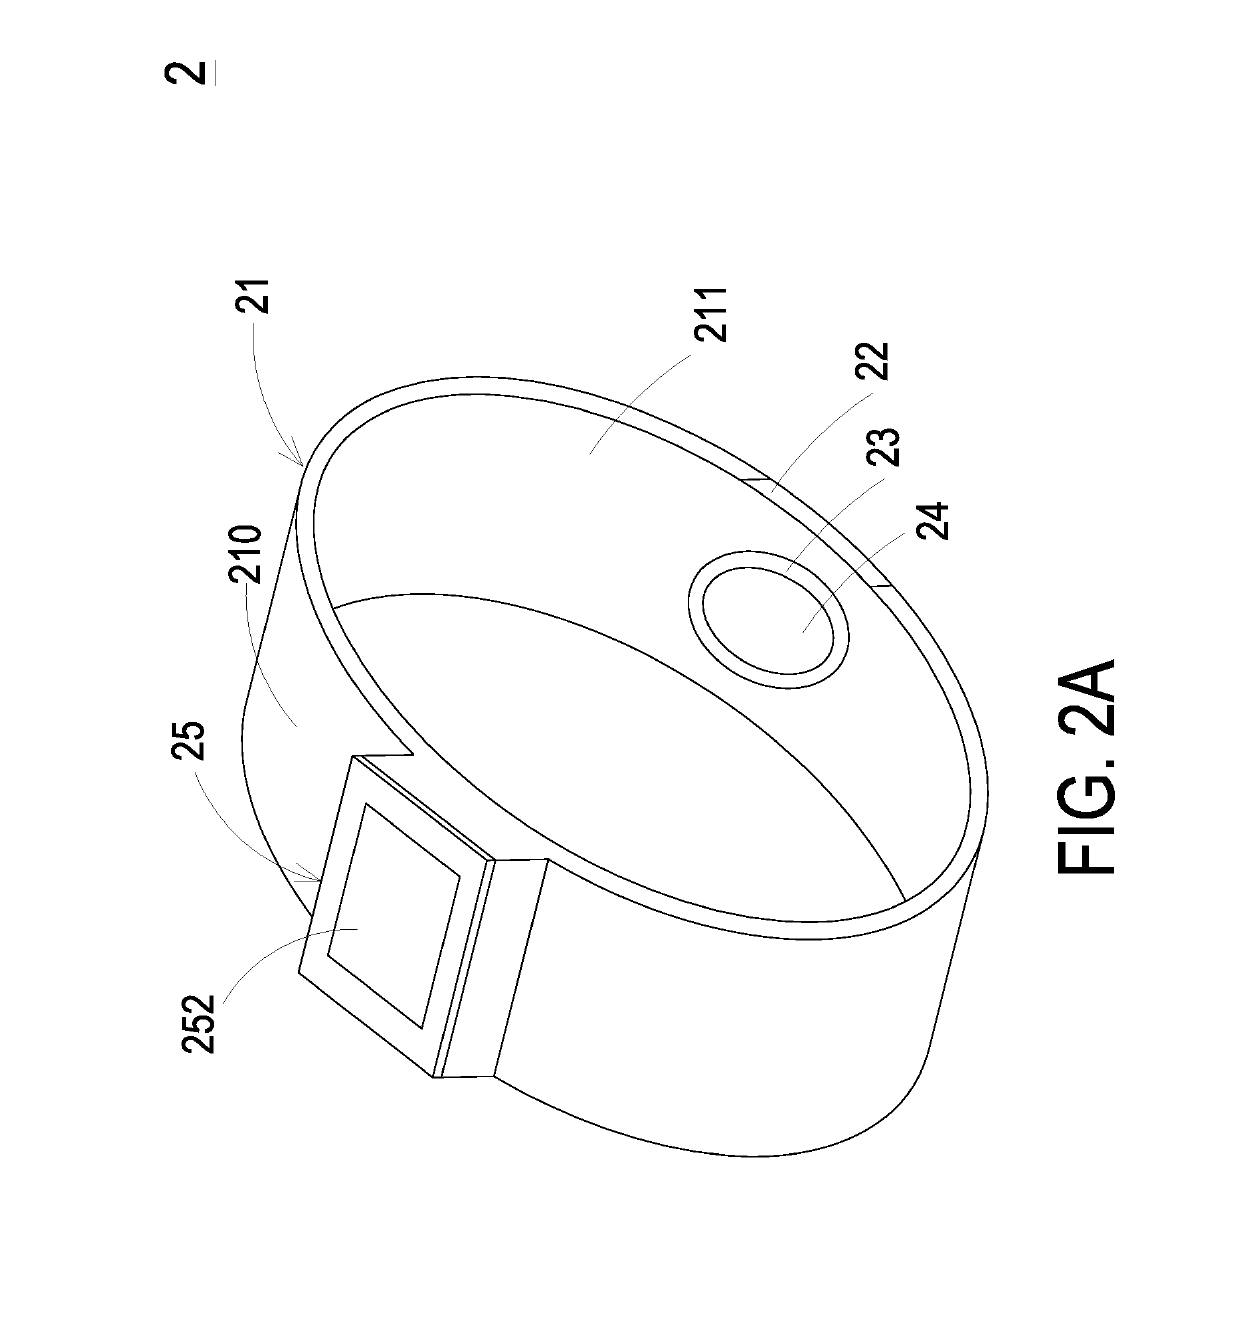 Wearable blood pressure measuring device